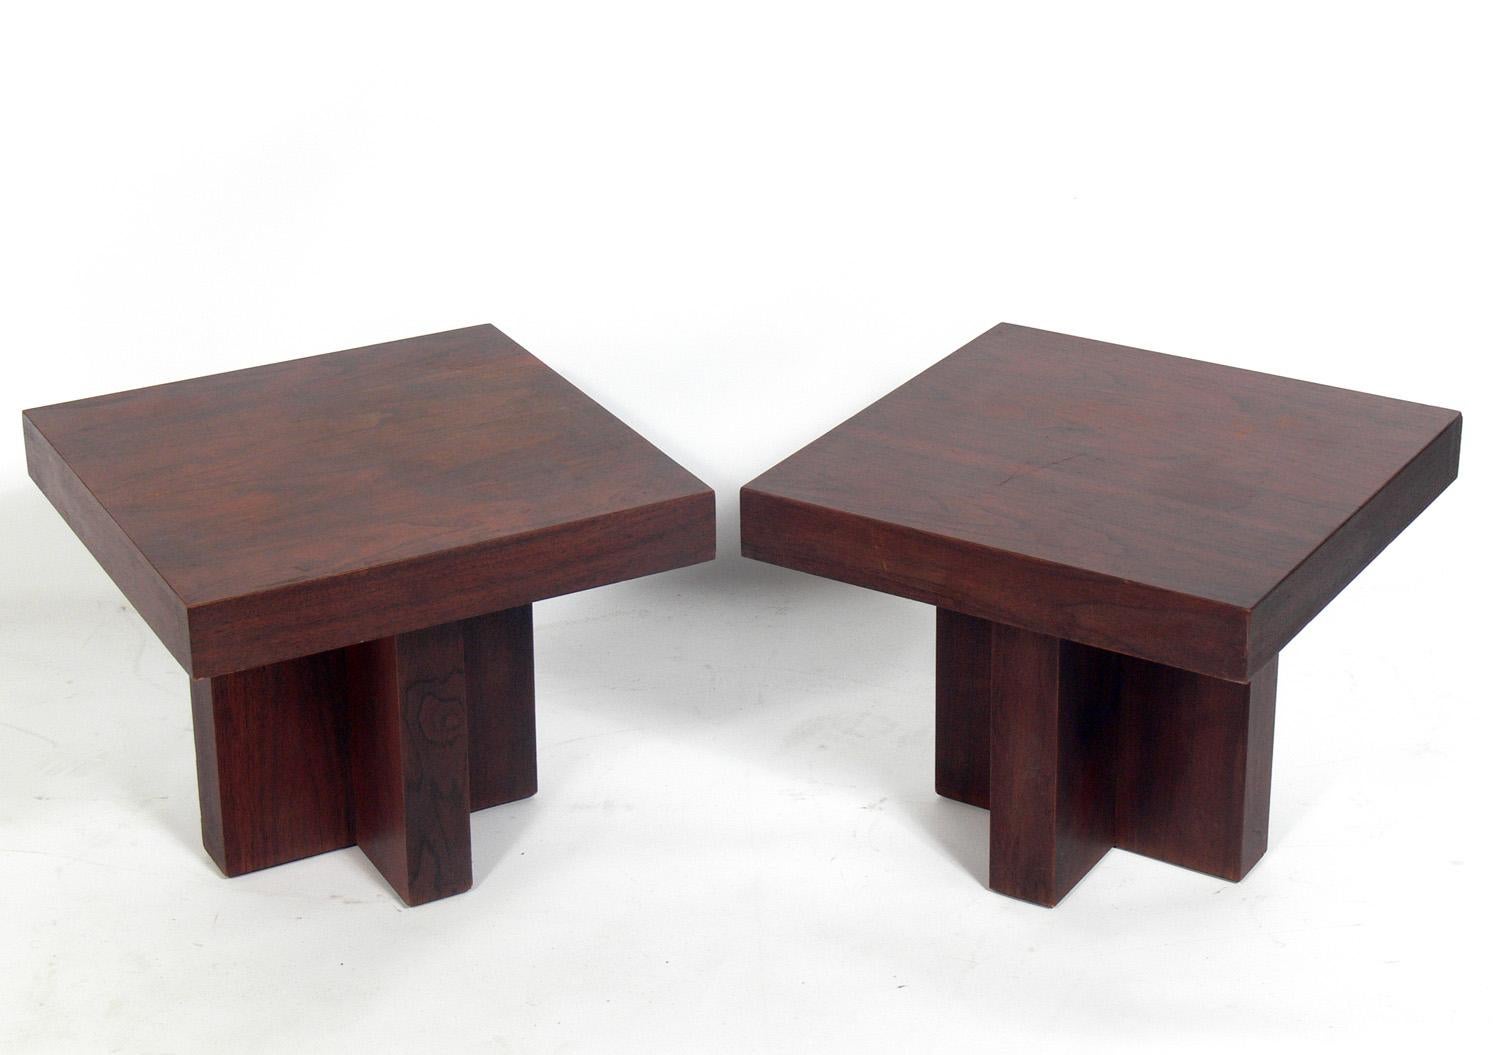 Pair of clean lined walnut end tables, in the style of Milo Baughman, American, circa 1960s. These tables have a clean lined architectural design and can be used as end or side tables, nightstands, or pushed together to be used as a coffee table.